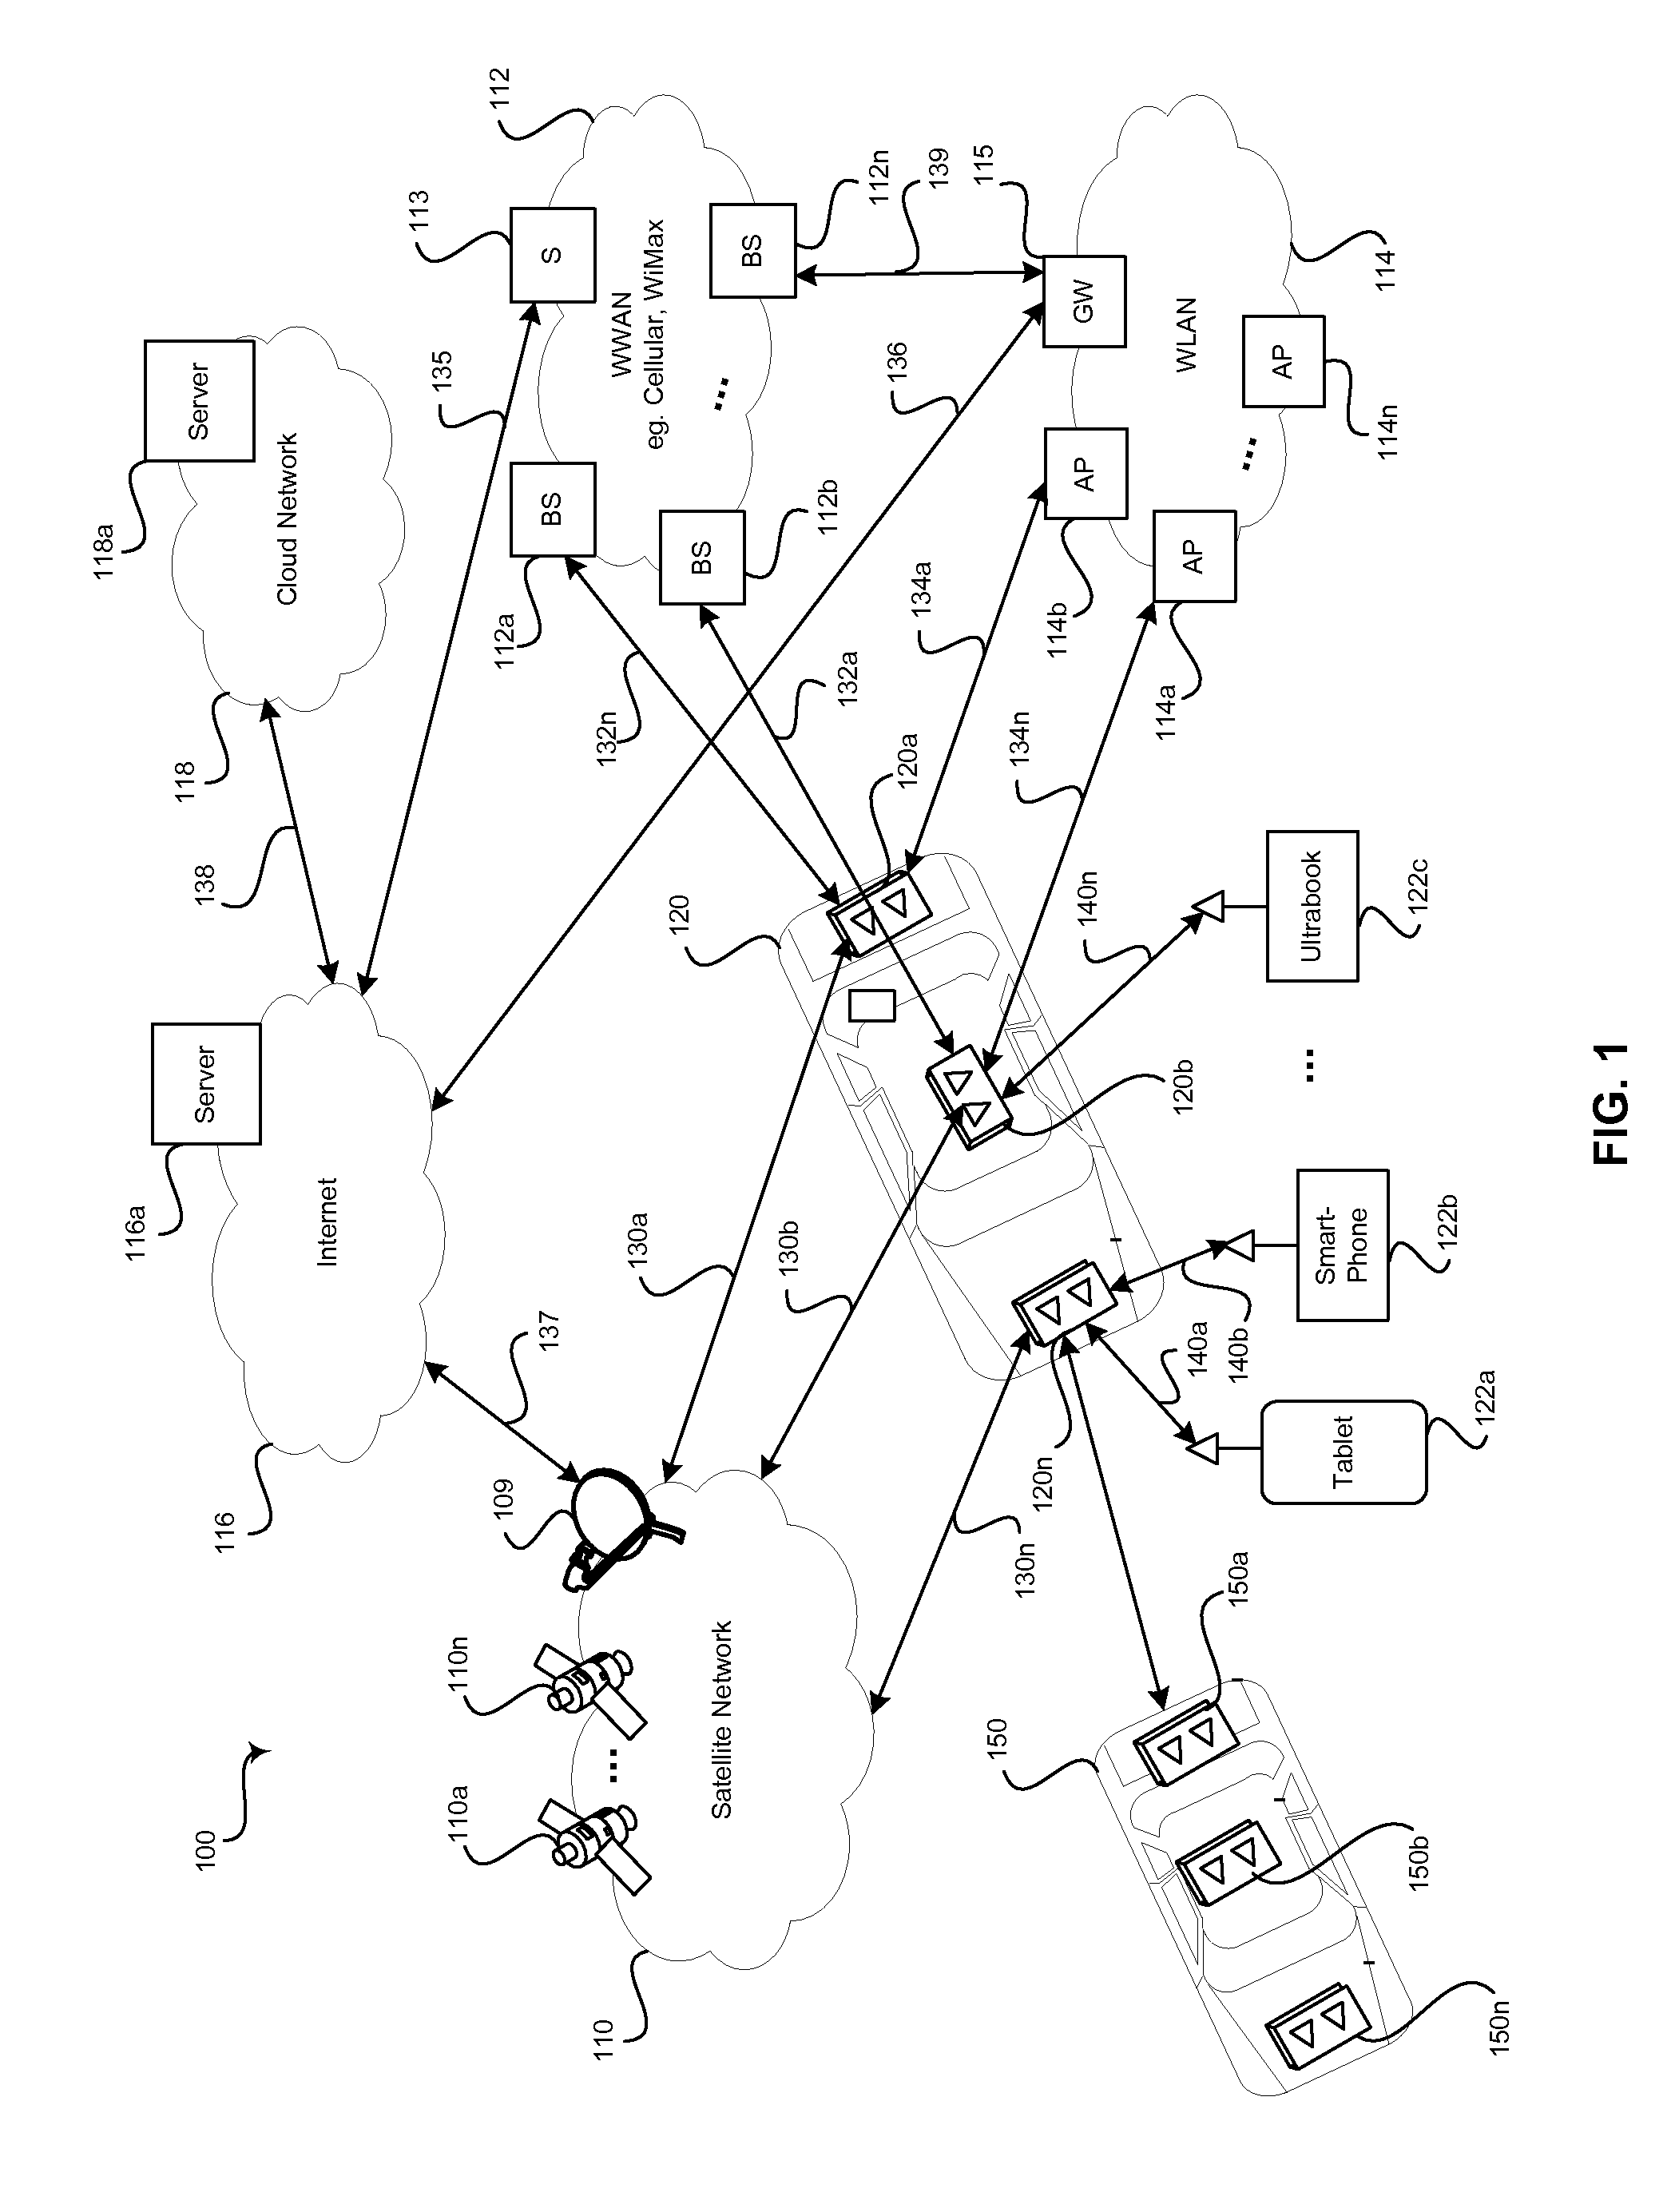 Method and system for distributed transceivers and mobile device connectivity